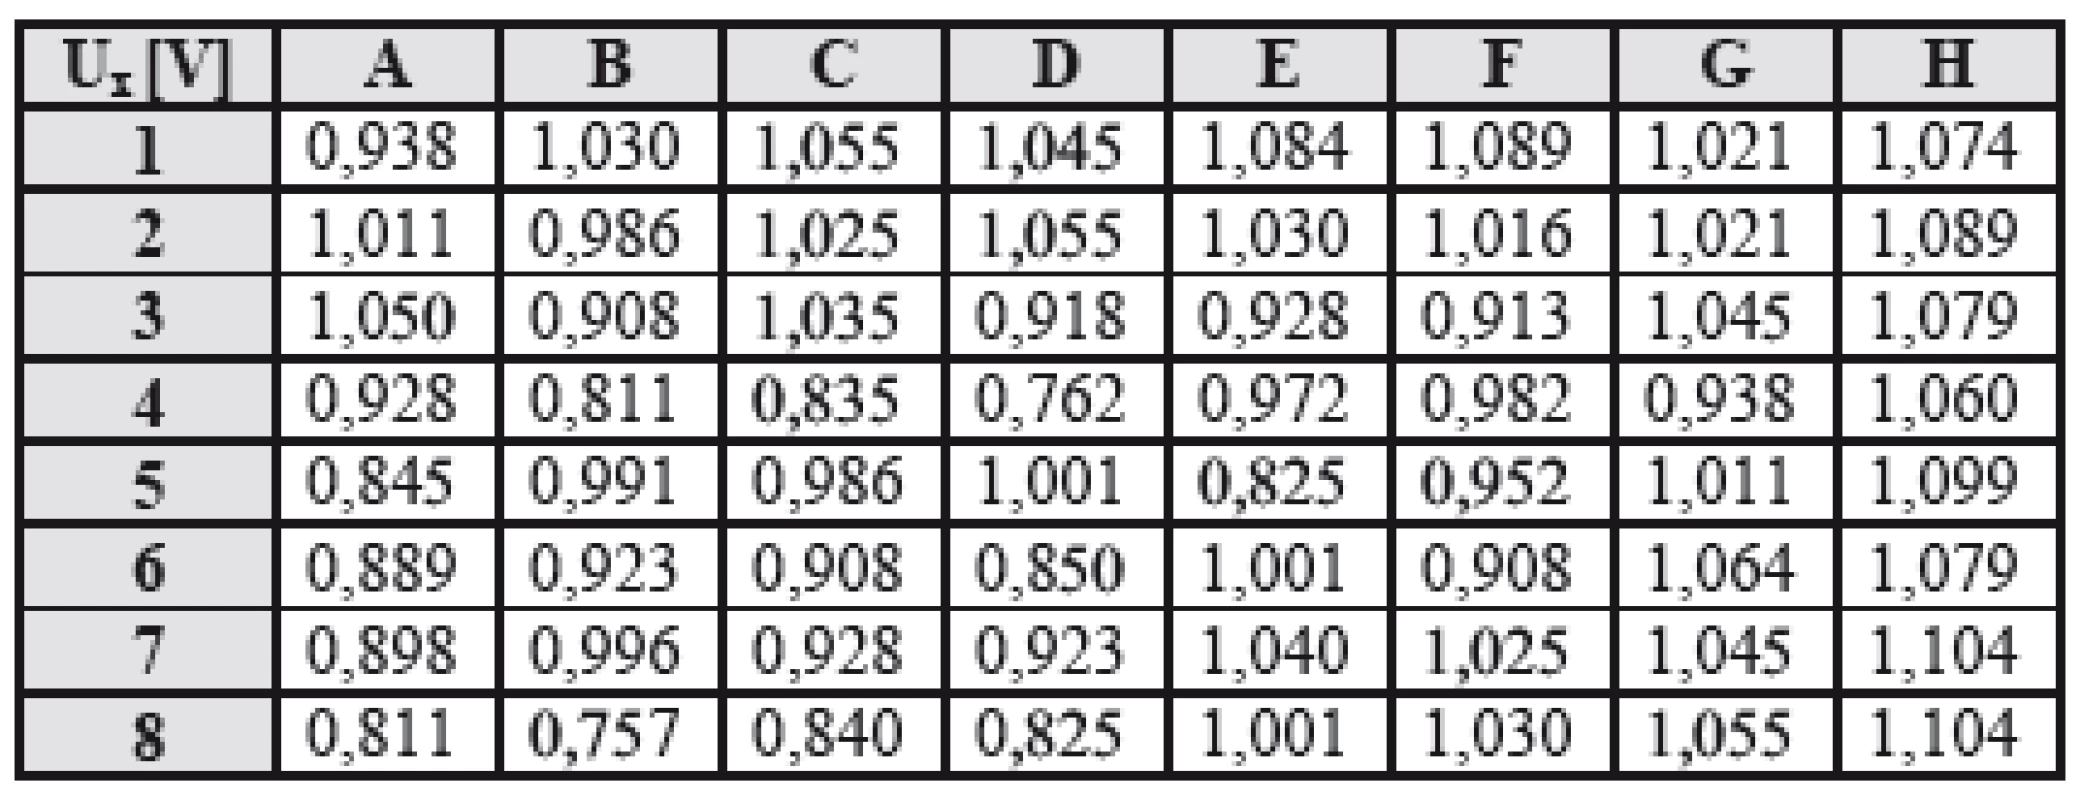 Table of measured voltages Ux on electrodes, in the middle of measurement, time t=15 minutes (8x8 electrodes in matrix, in rows and columns).